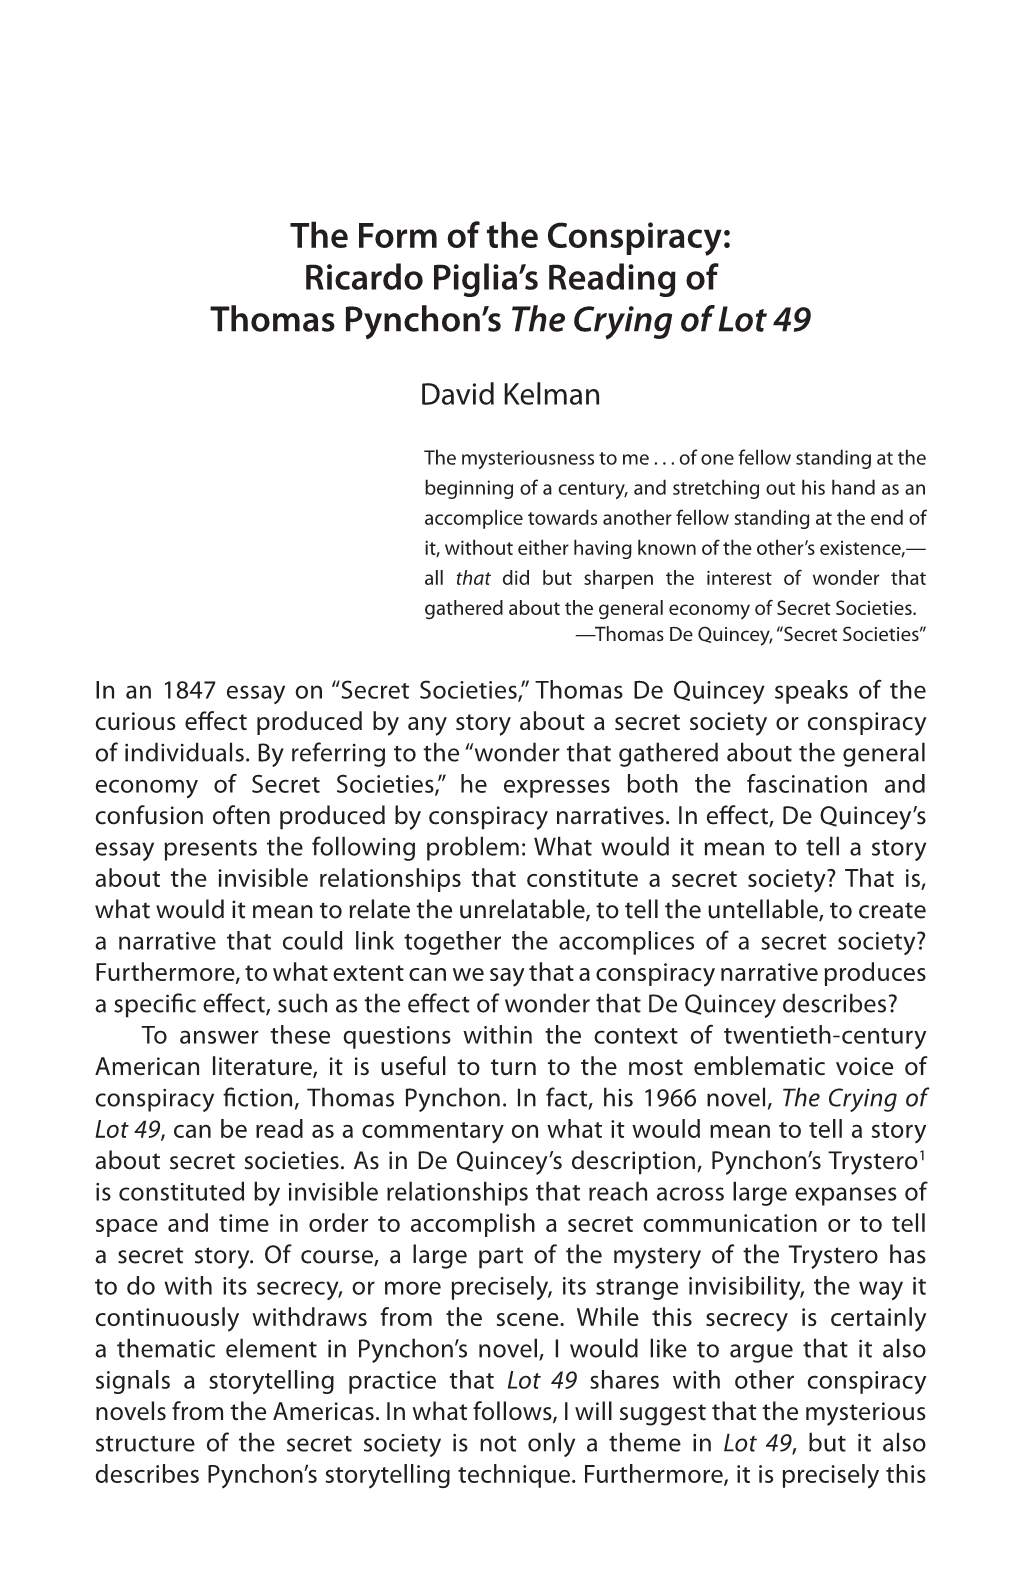 The Form of the Conspiracy: Ricardo Piglia's Reading of Thomas Pynchon's the Crying of Lot 49